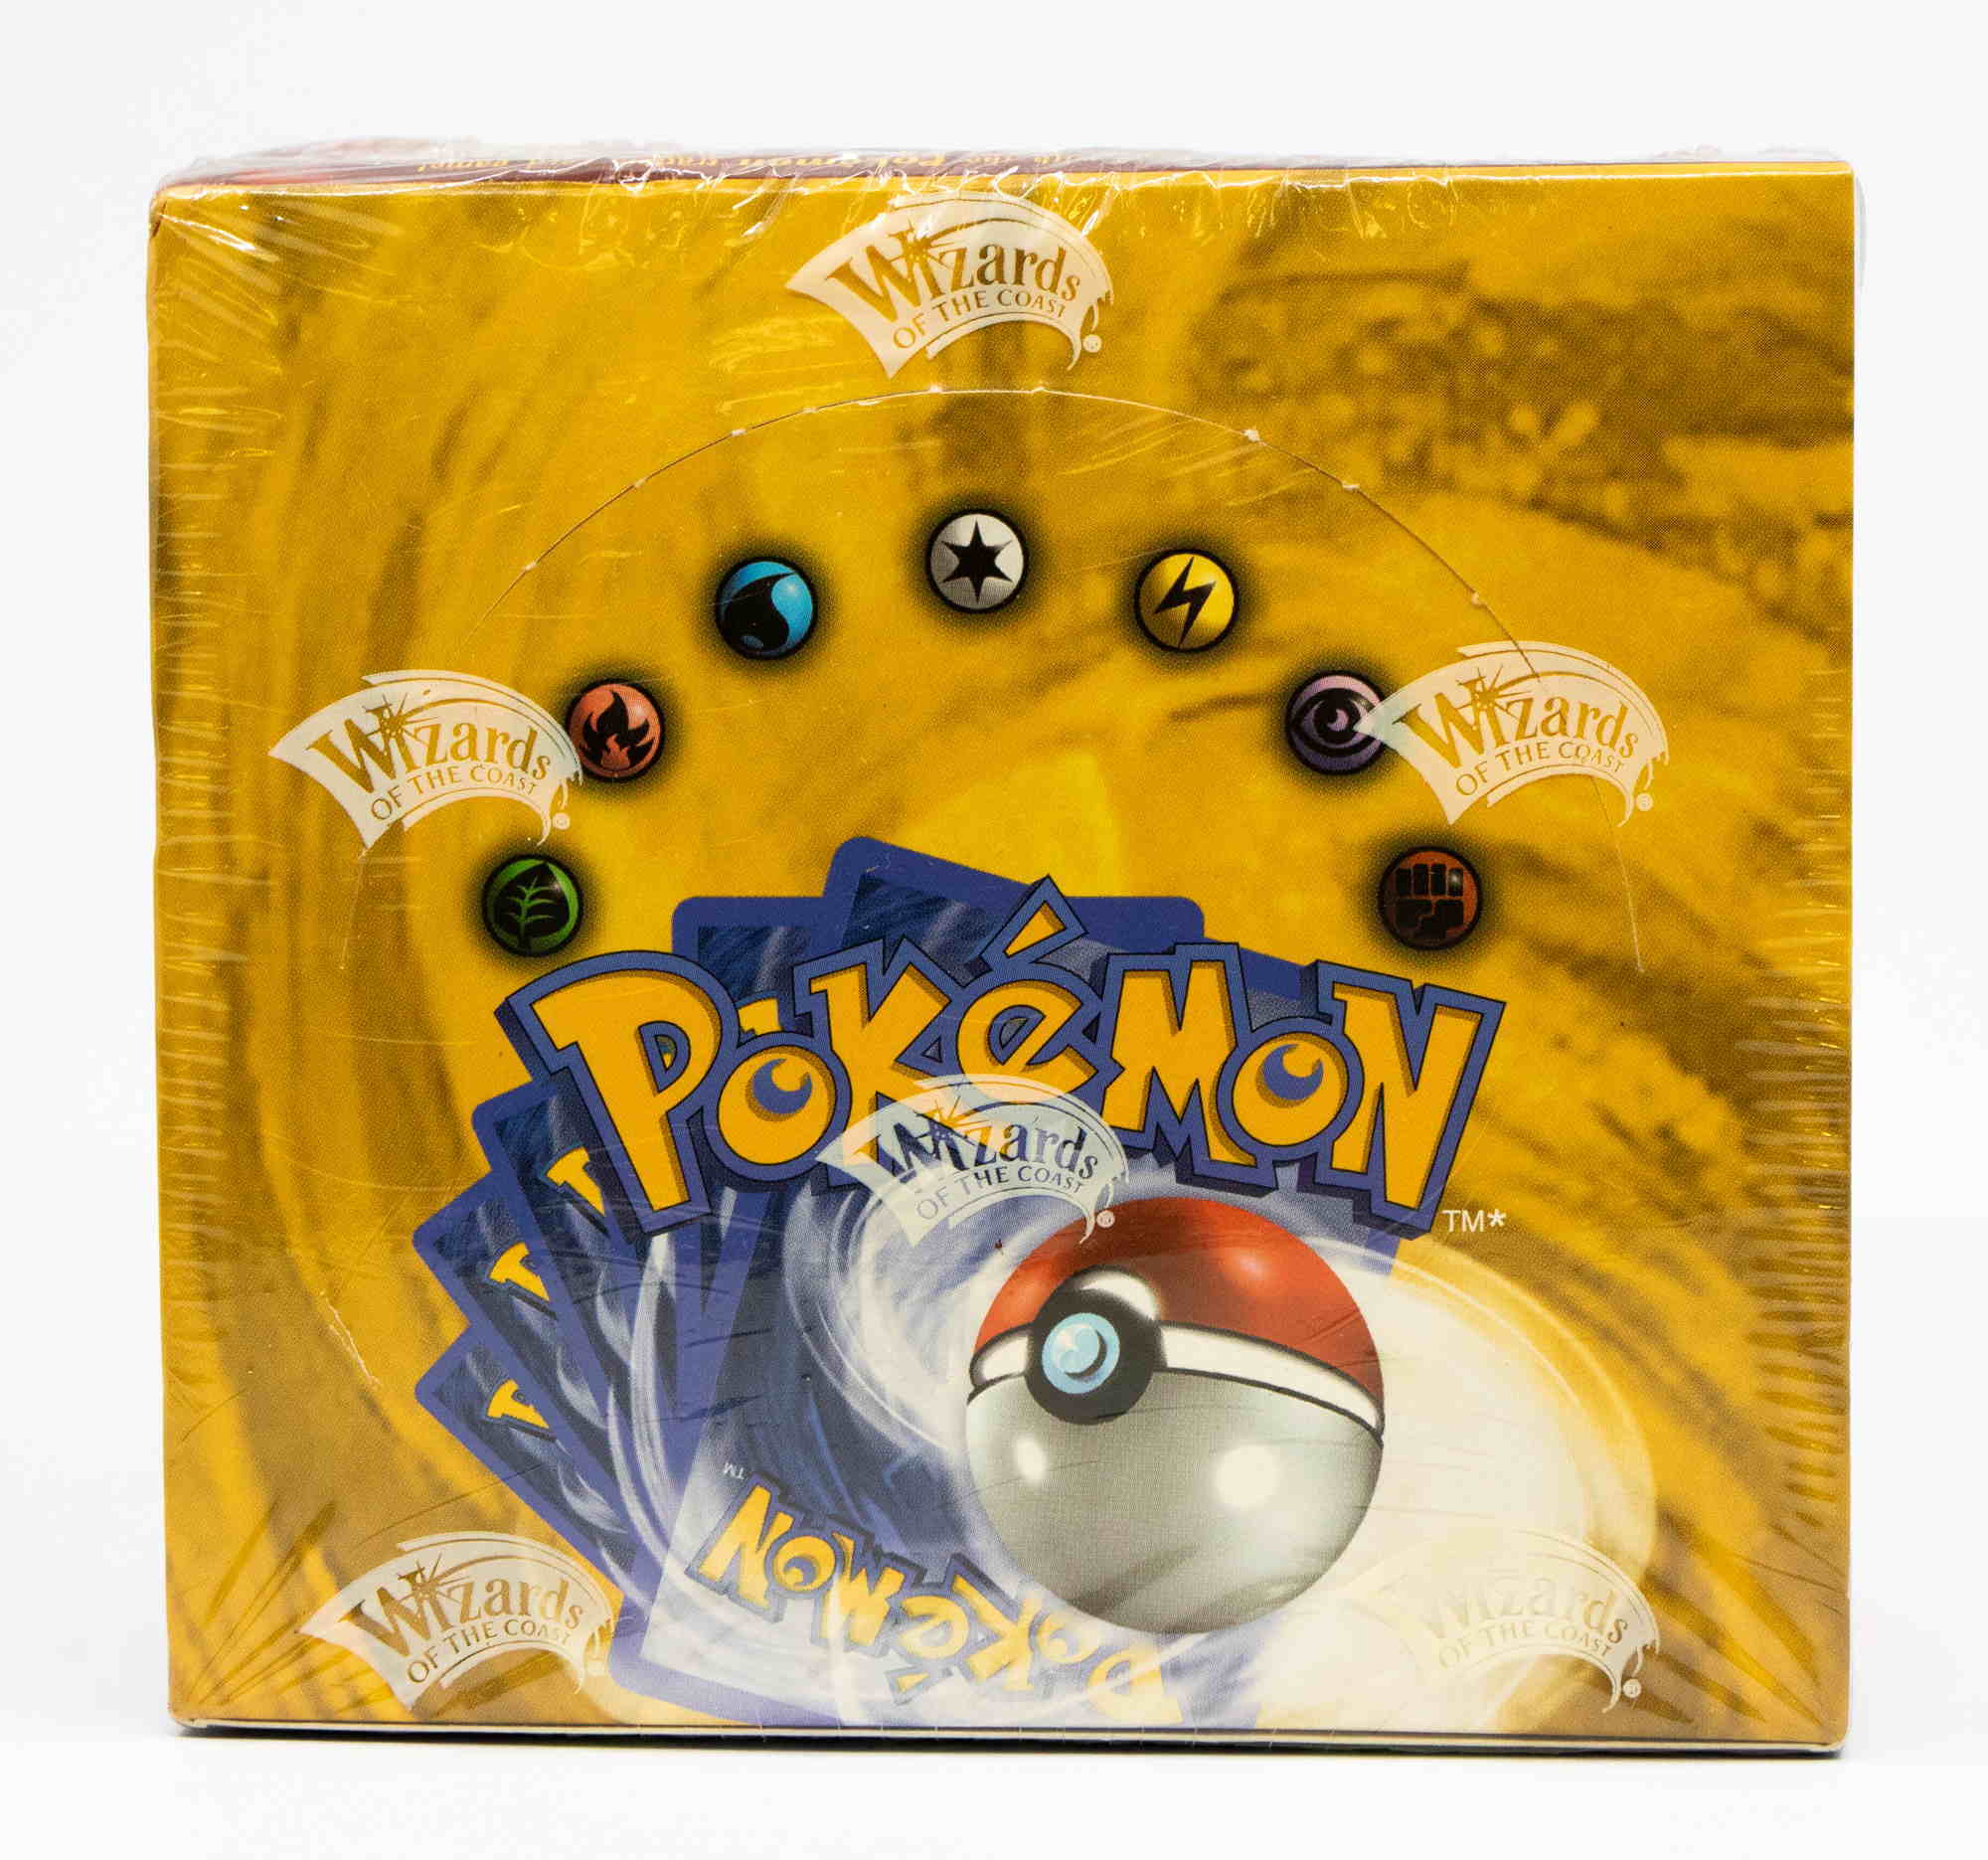 Pokémon Fourth Print Base Set Booster Box, estimated value £16,000-£20,000. Picture credit: Hansons Auctioneers.